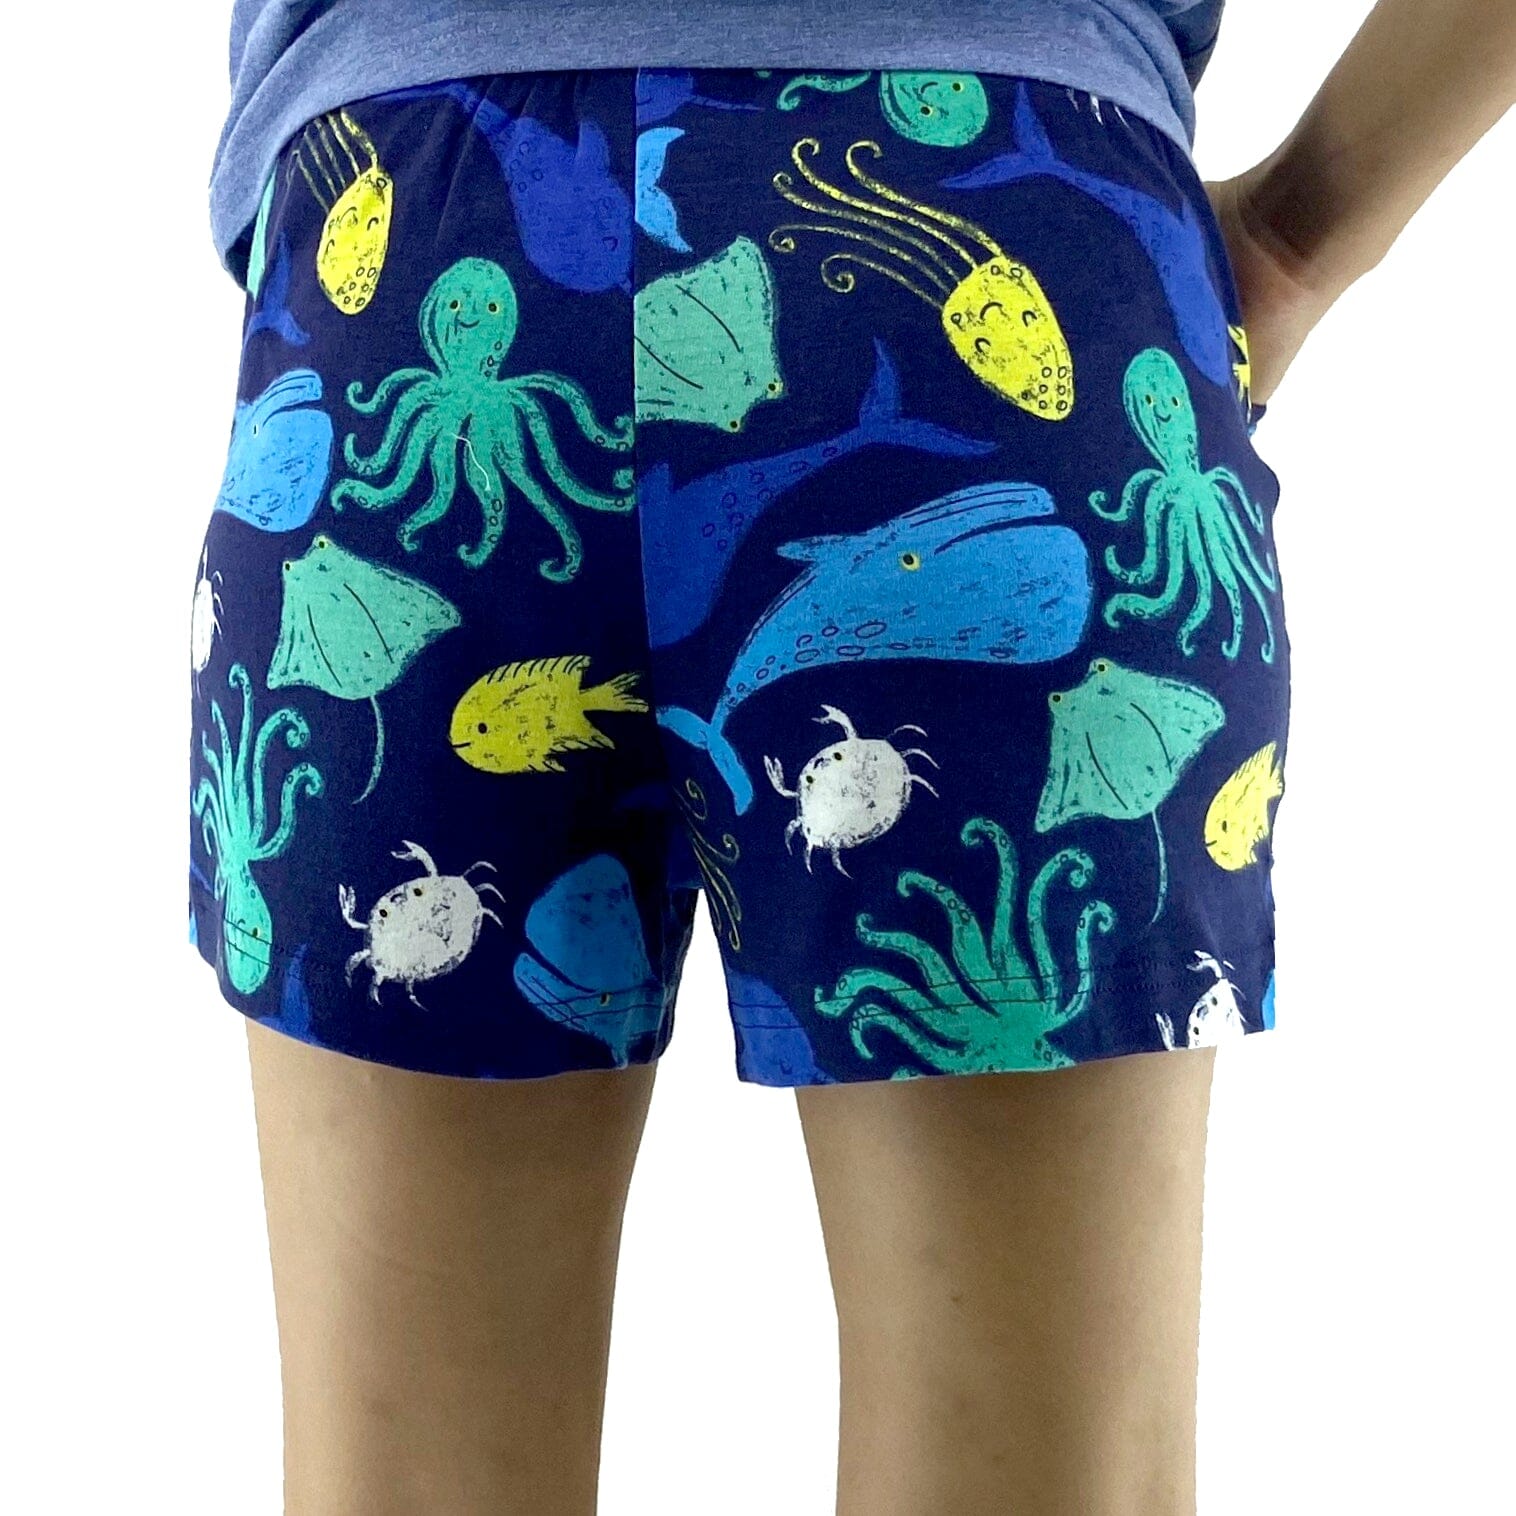 Women's Sea Creatures Whale Narwhal Crab Print Knit Pyjama Bottoms